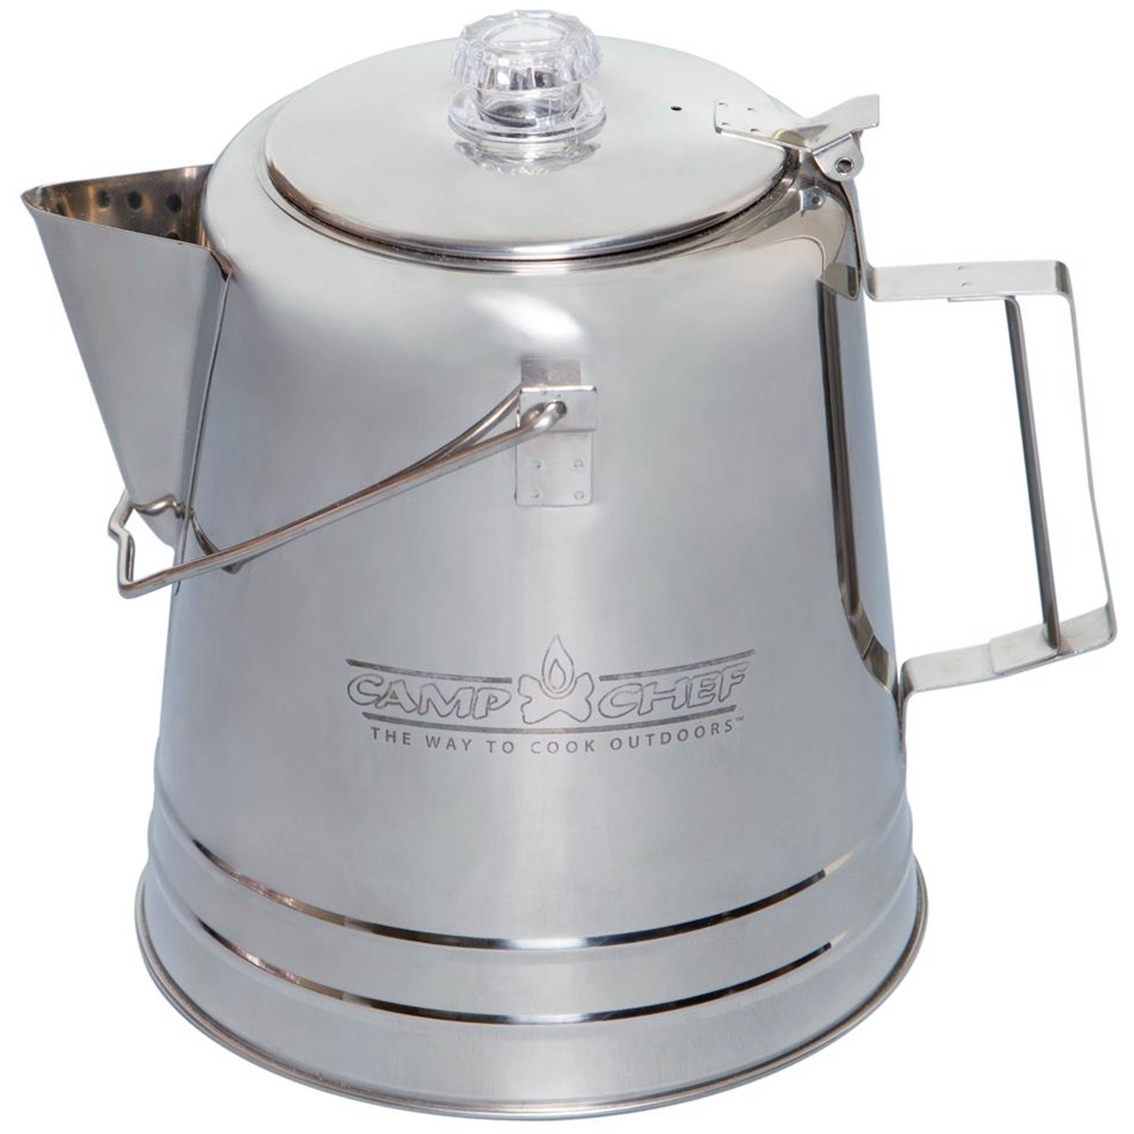 Camp Chef Stainless Steel Coffee Pot 28 Cup, Cooking, Sports & Outdoors